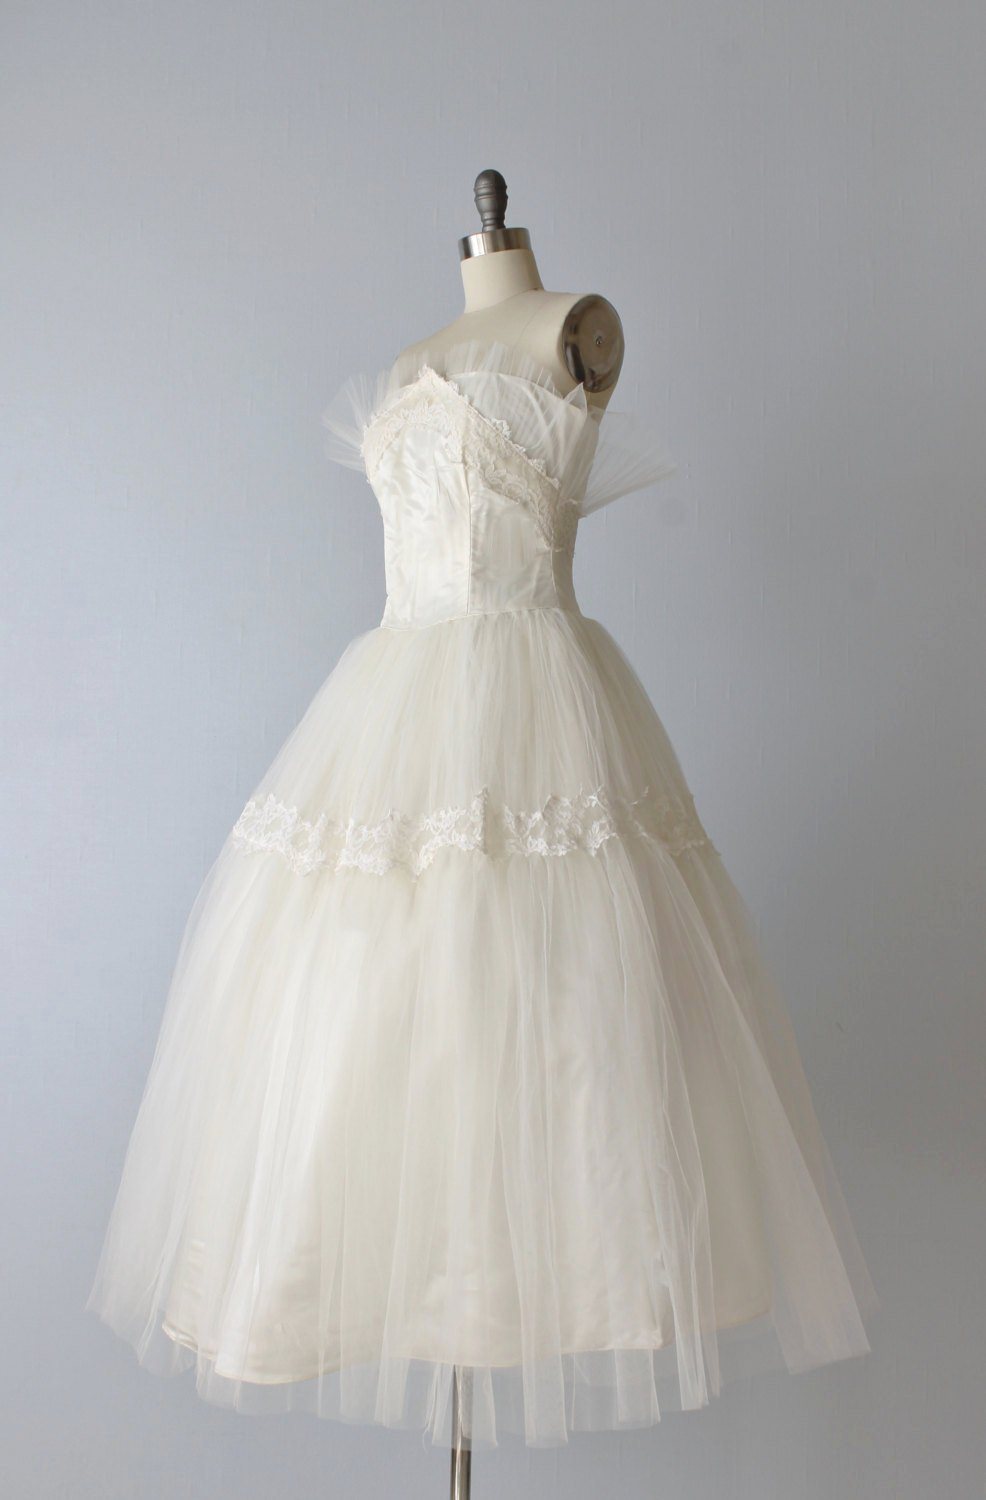 1950s Tulle Wedding Dress from The Vintage Mistress